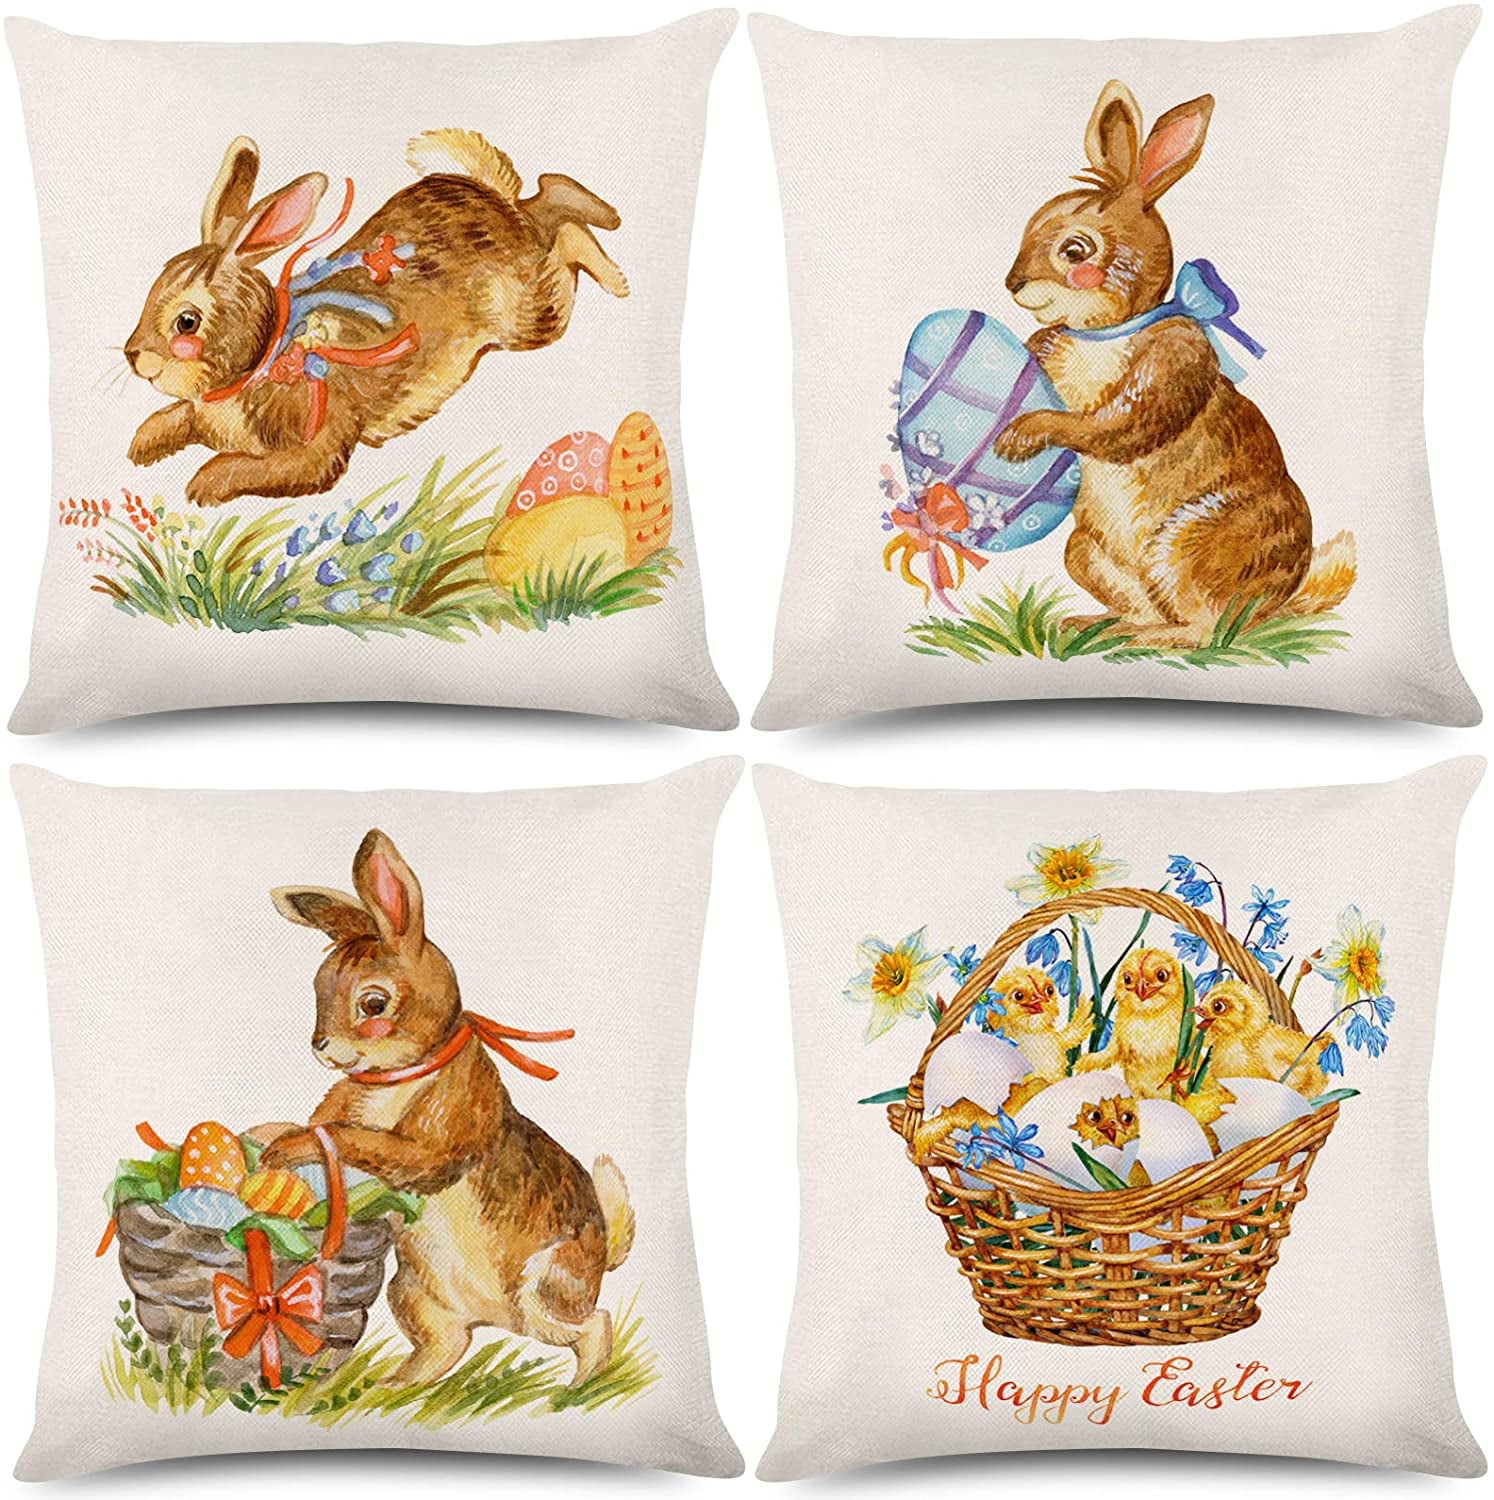 Easter Bunny Home Decorative Throw Pillow Case Cushion Cover Grass Rabbit Flower 